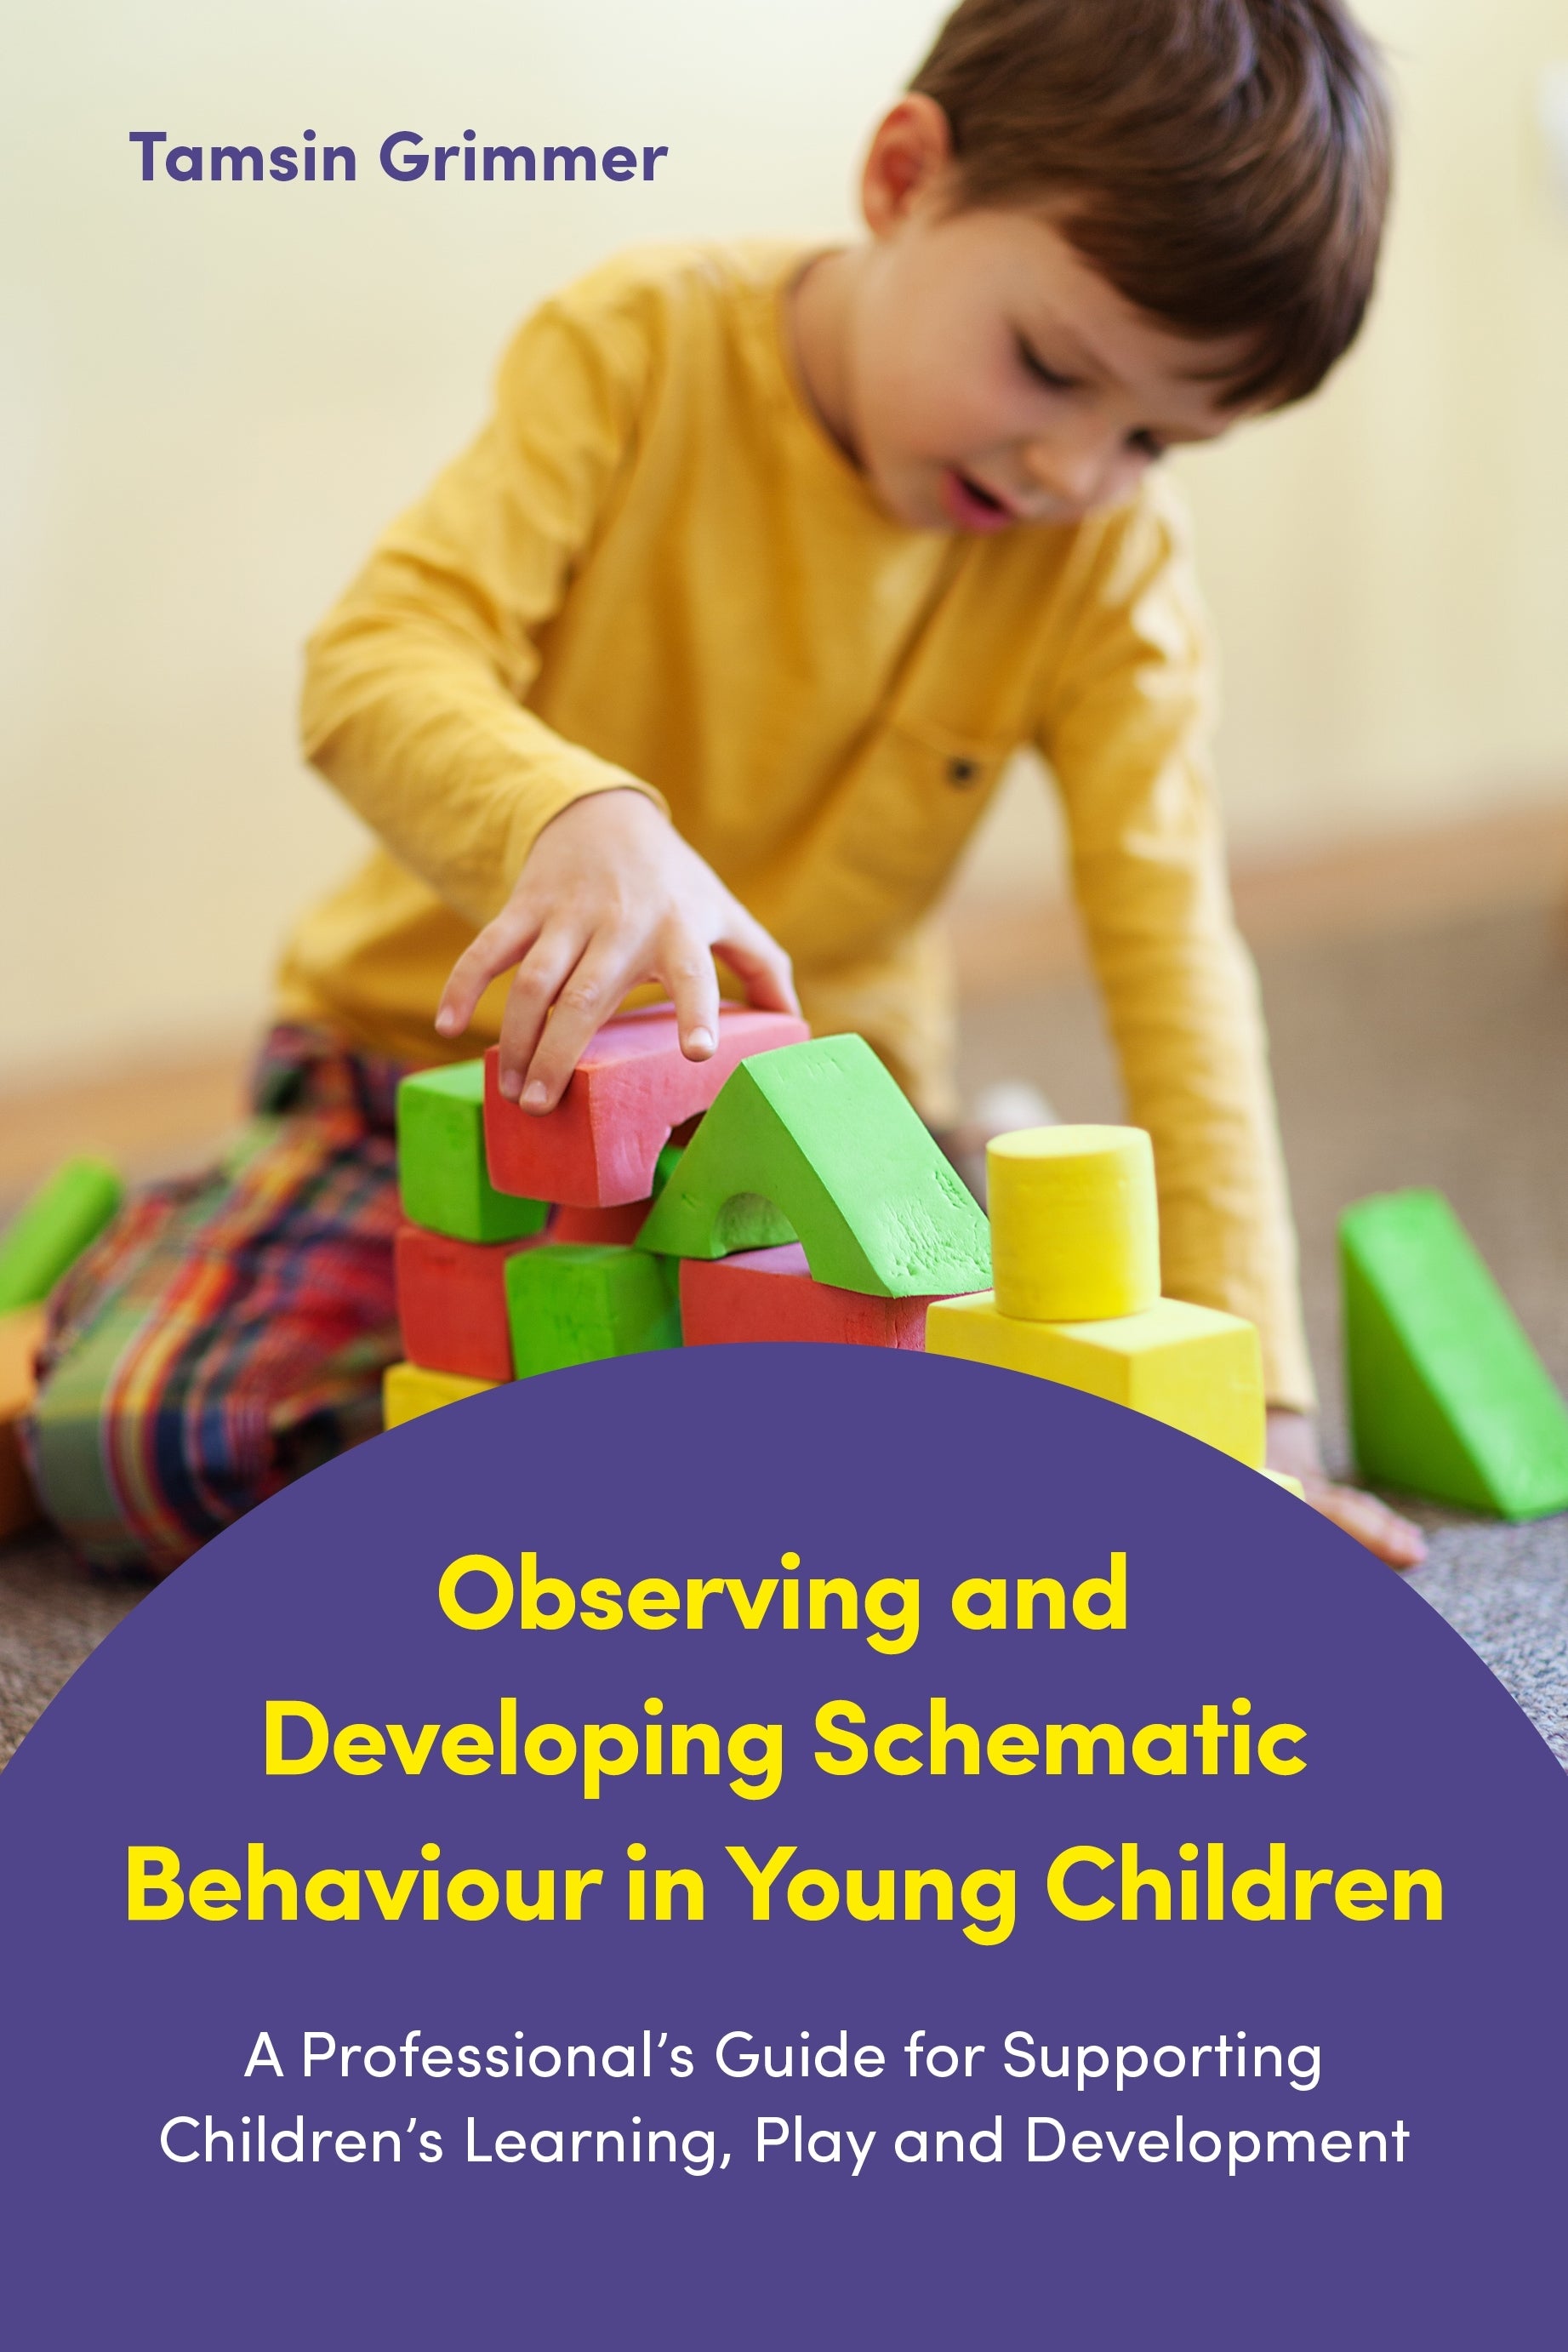 Observing and Developing Schematic Behaviour in Young Children by Tamsin Grimmer